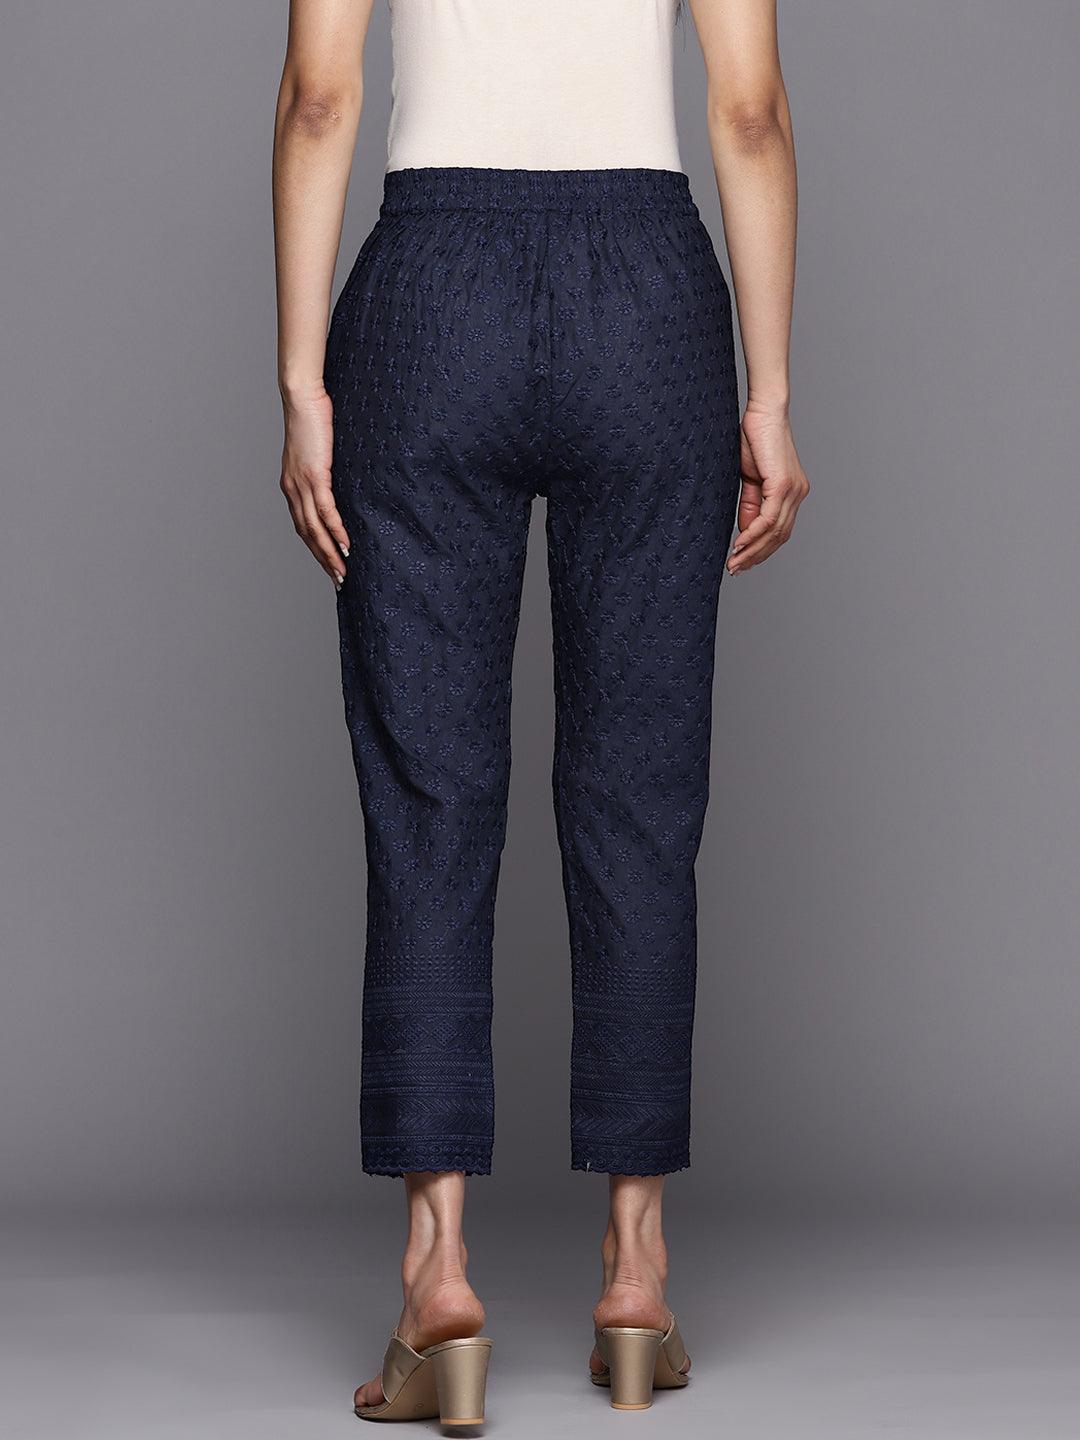 Navy Blue Embroidered Cotton Trousers